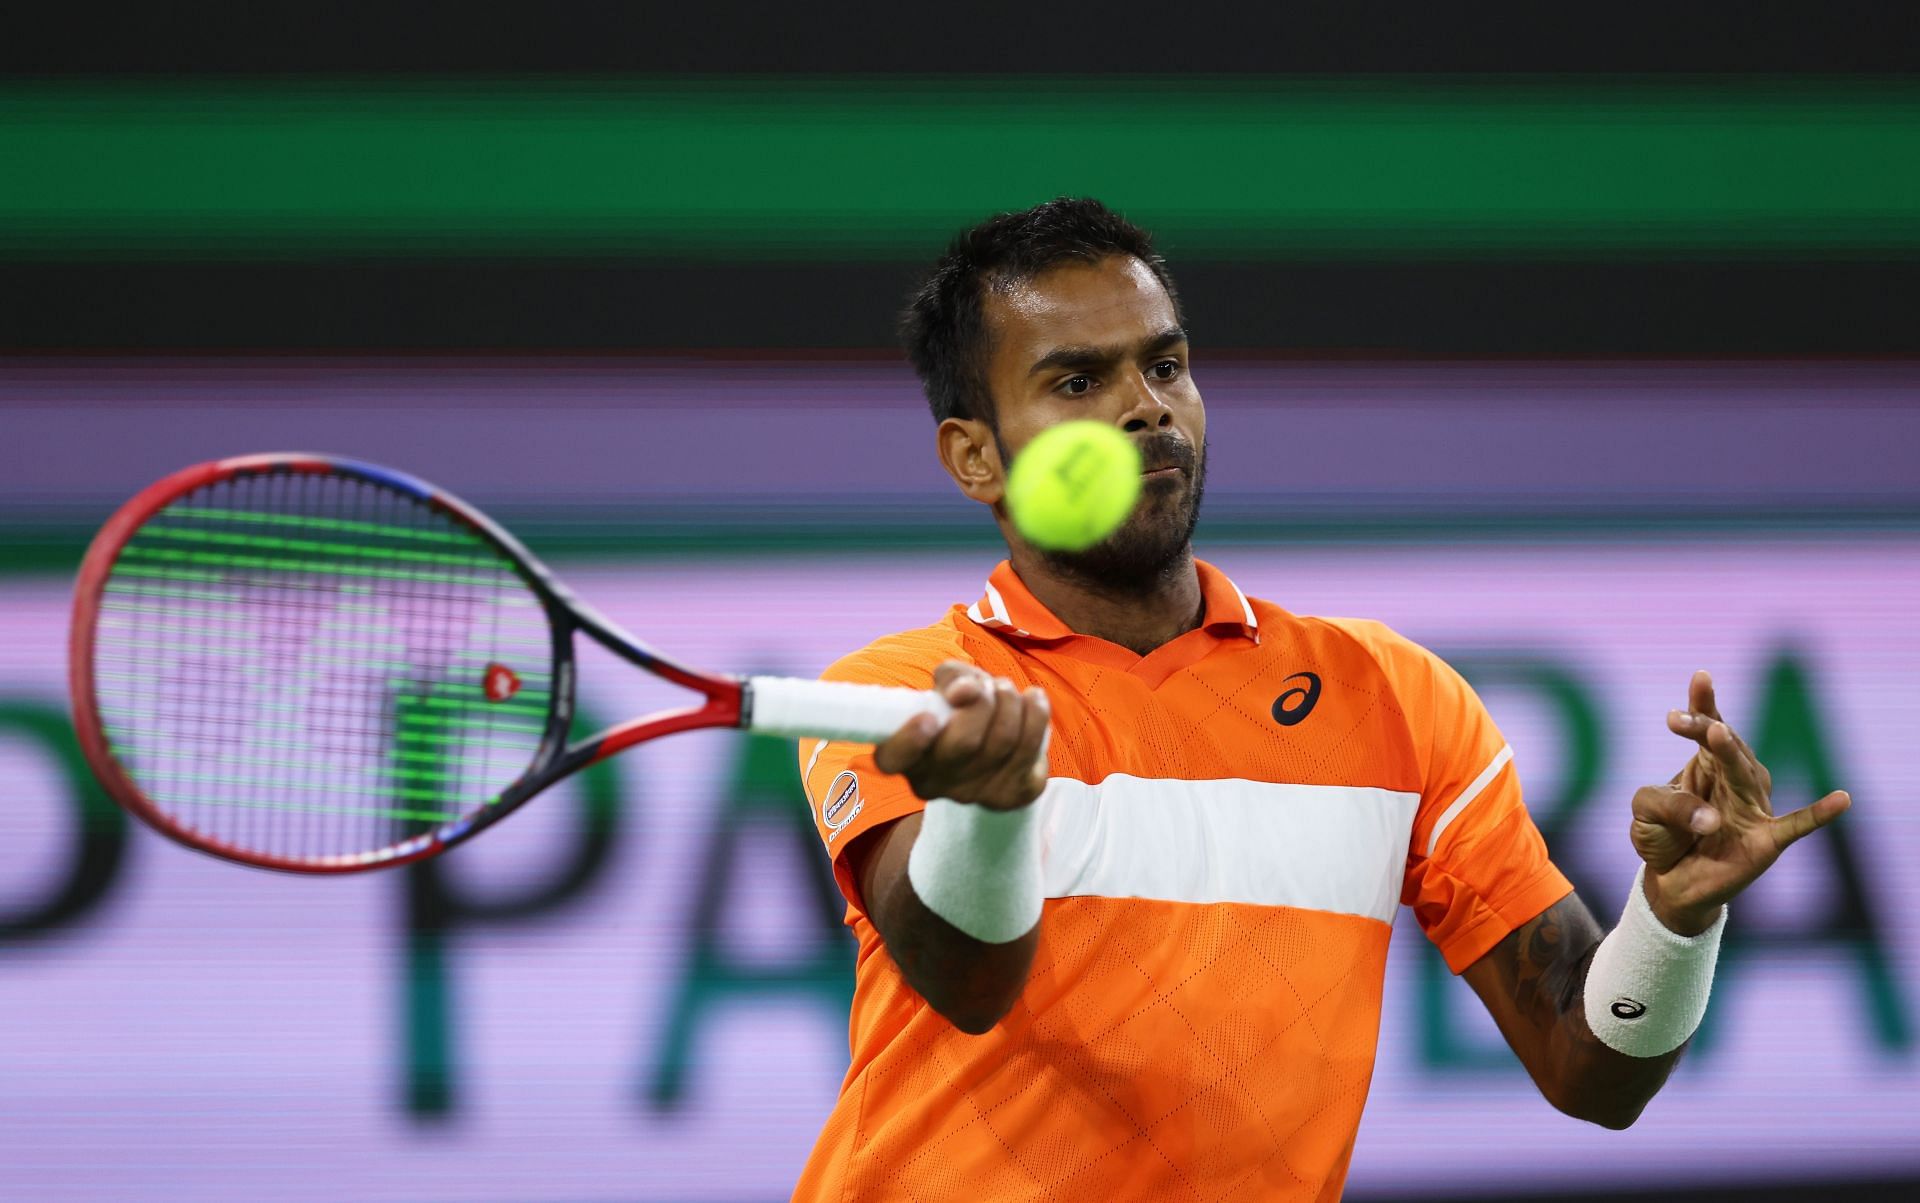 Sumit Nagal defeats Facundo Diaz Acosta in qualifying draw, becomes first Indian in 42 years to reach Monte-Carlo Masters main draw